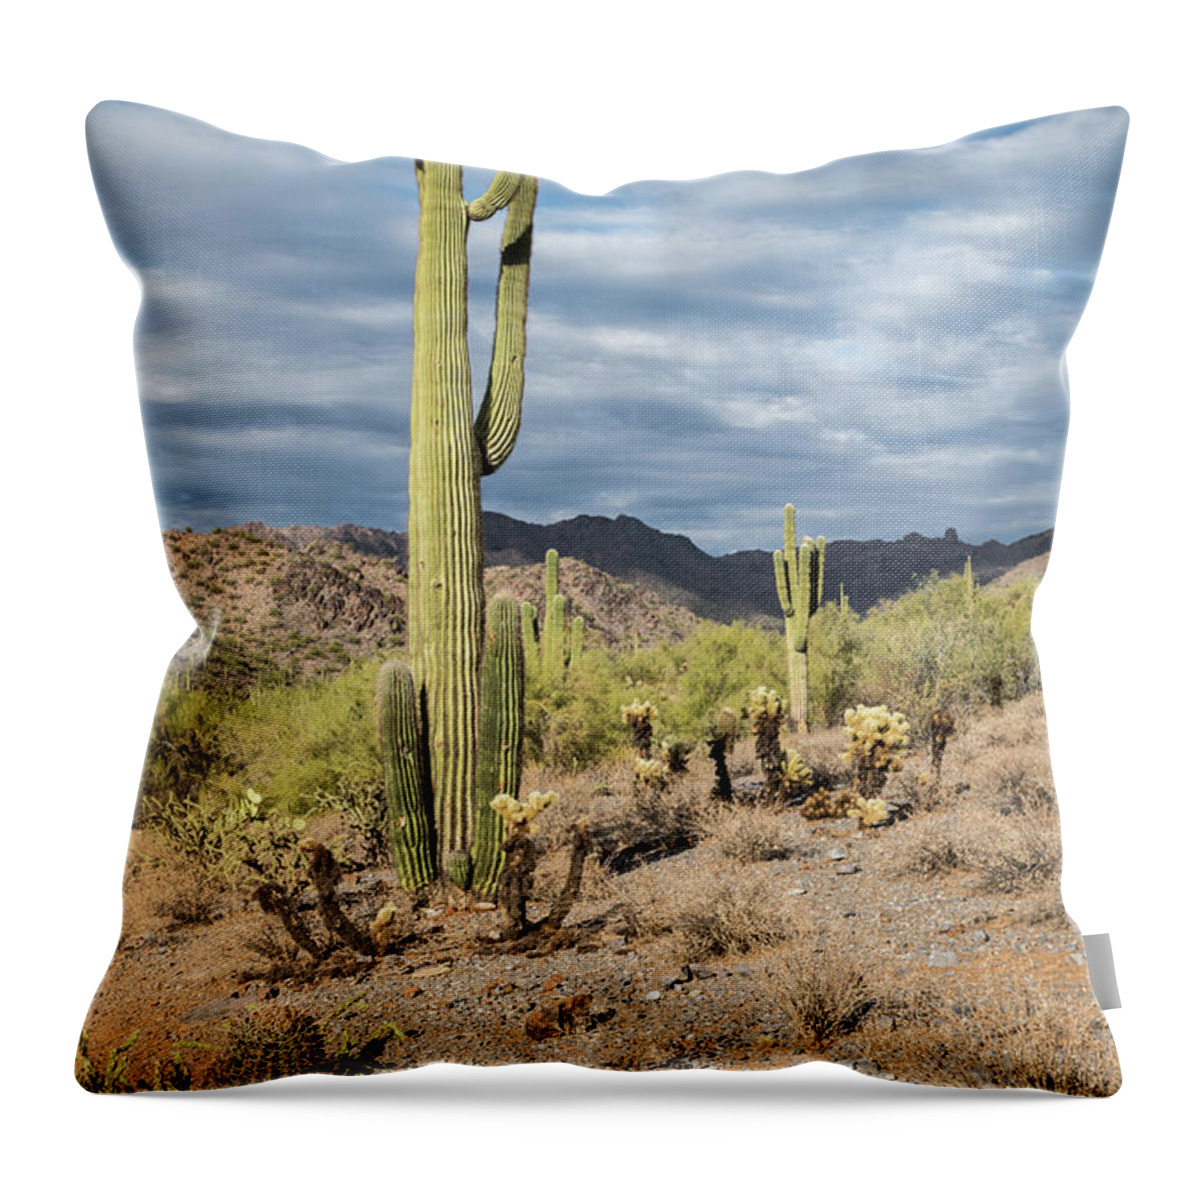 Mcdowell Throw Pillow featuring the photograph McDowell Cactus by David Hart